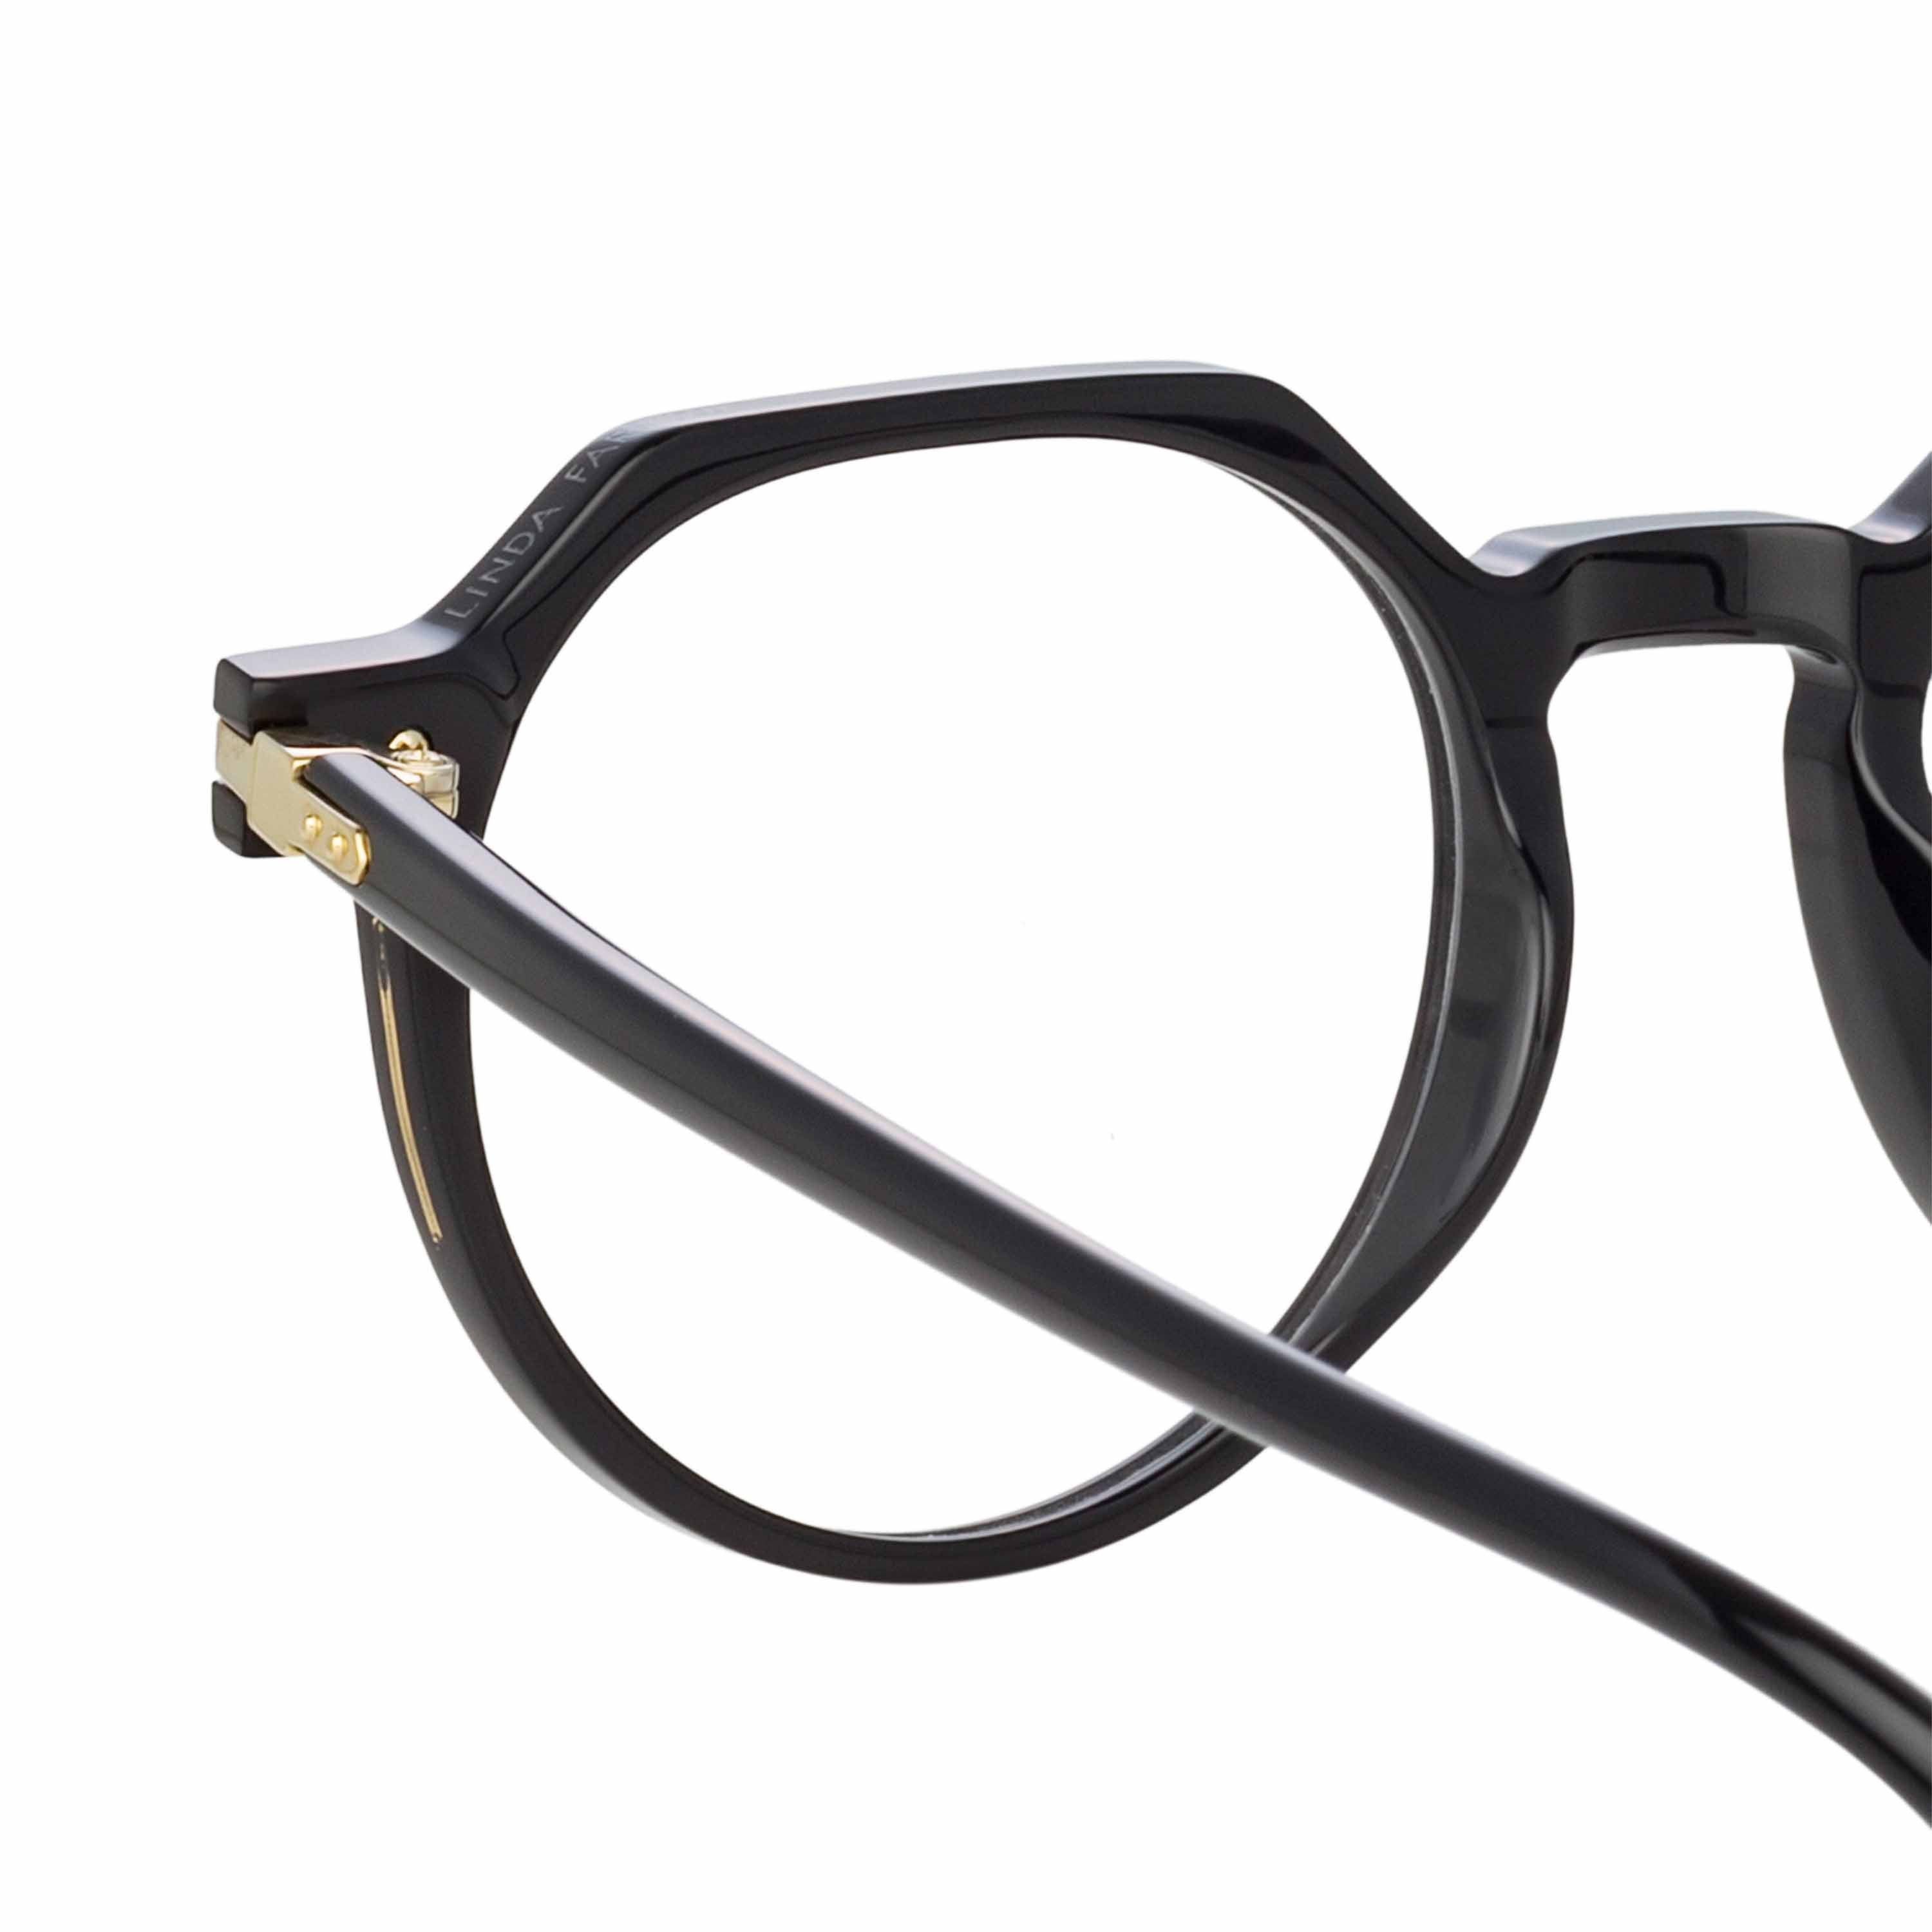 Color_LF50C1OPT - Griffin Oval Optical Frame in Black